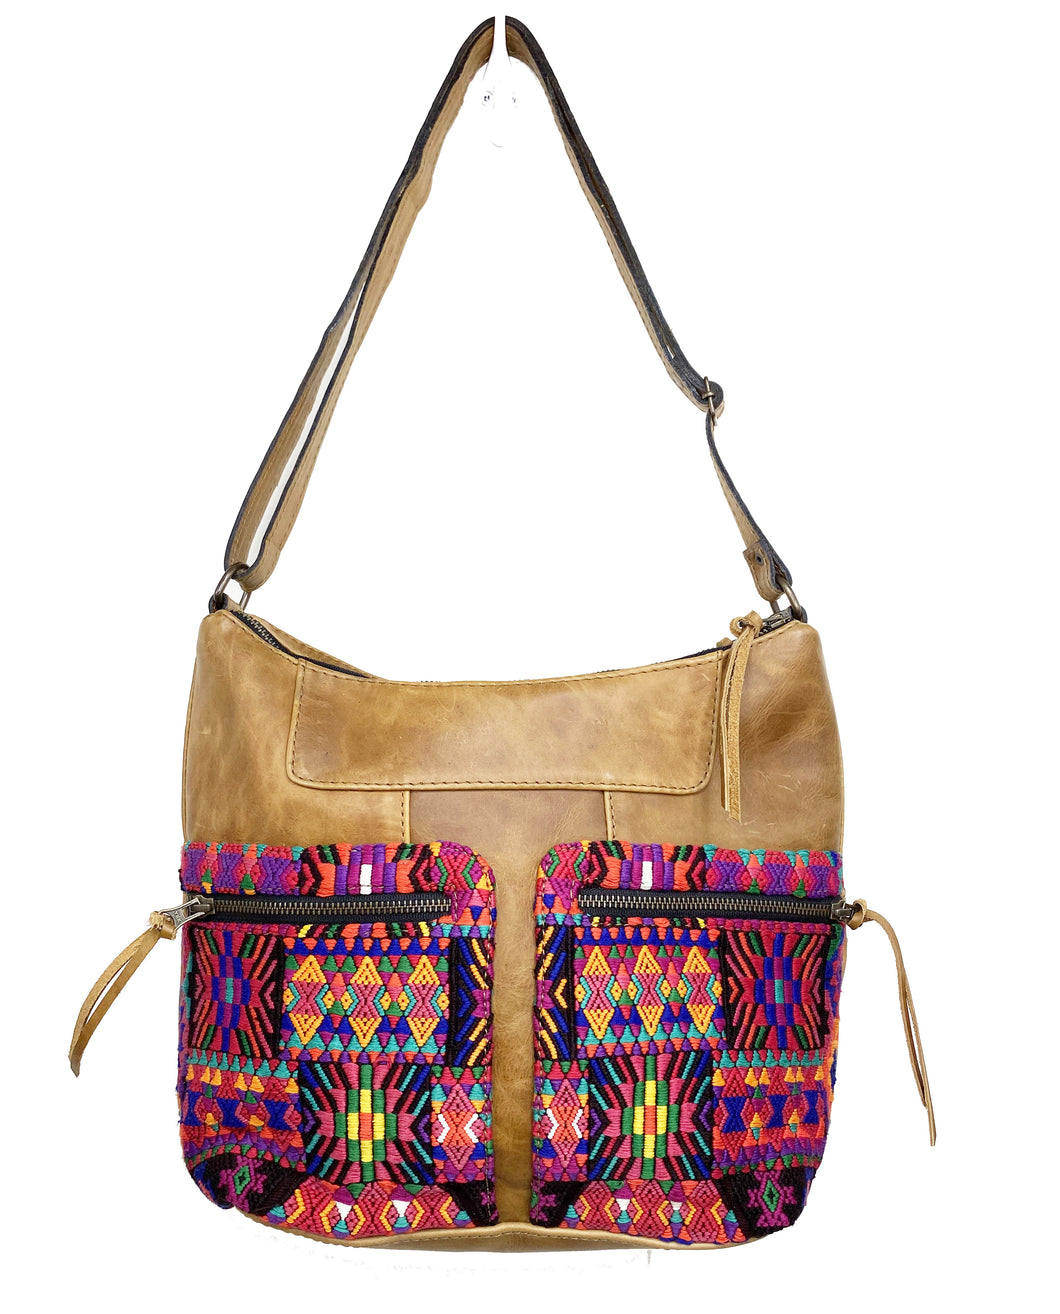 MoonLake Designs Rosa Crossbody in light tan leather with southwestern colors geometric huipil design on double zippered outer pockets and adjustable cross body strap